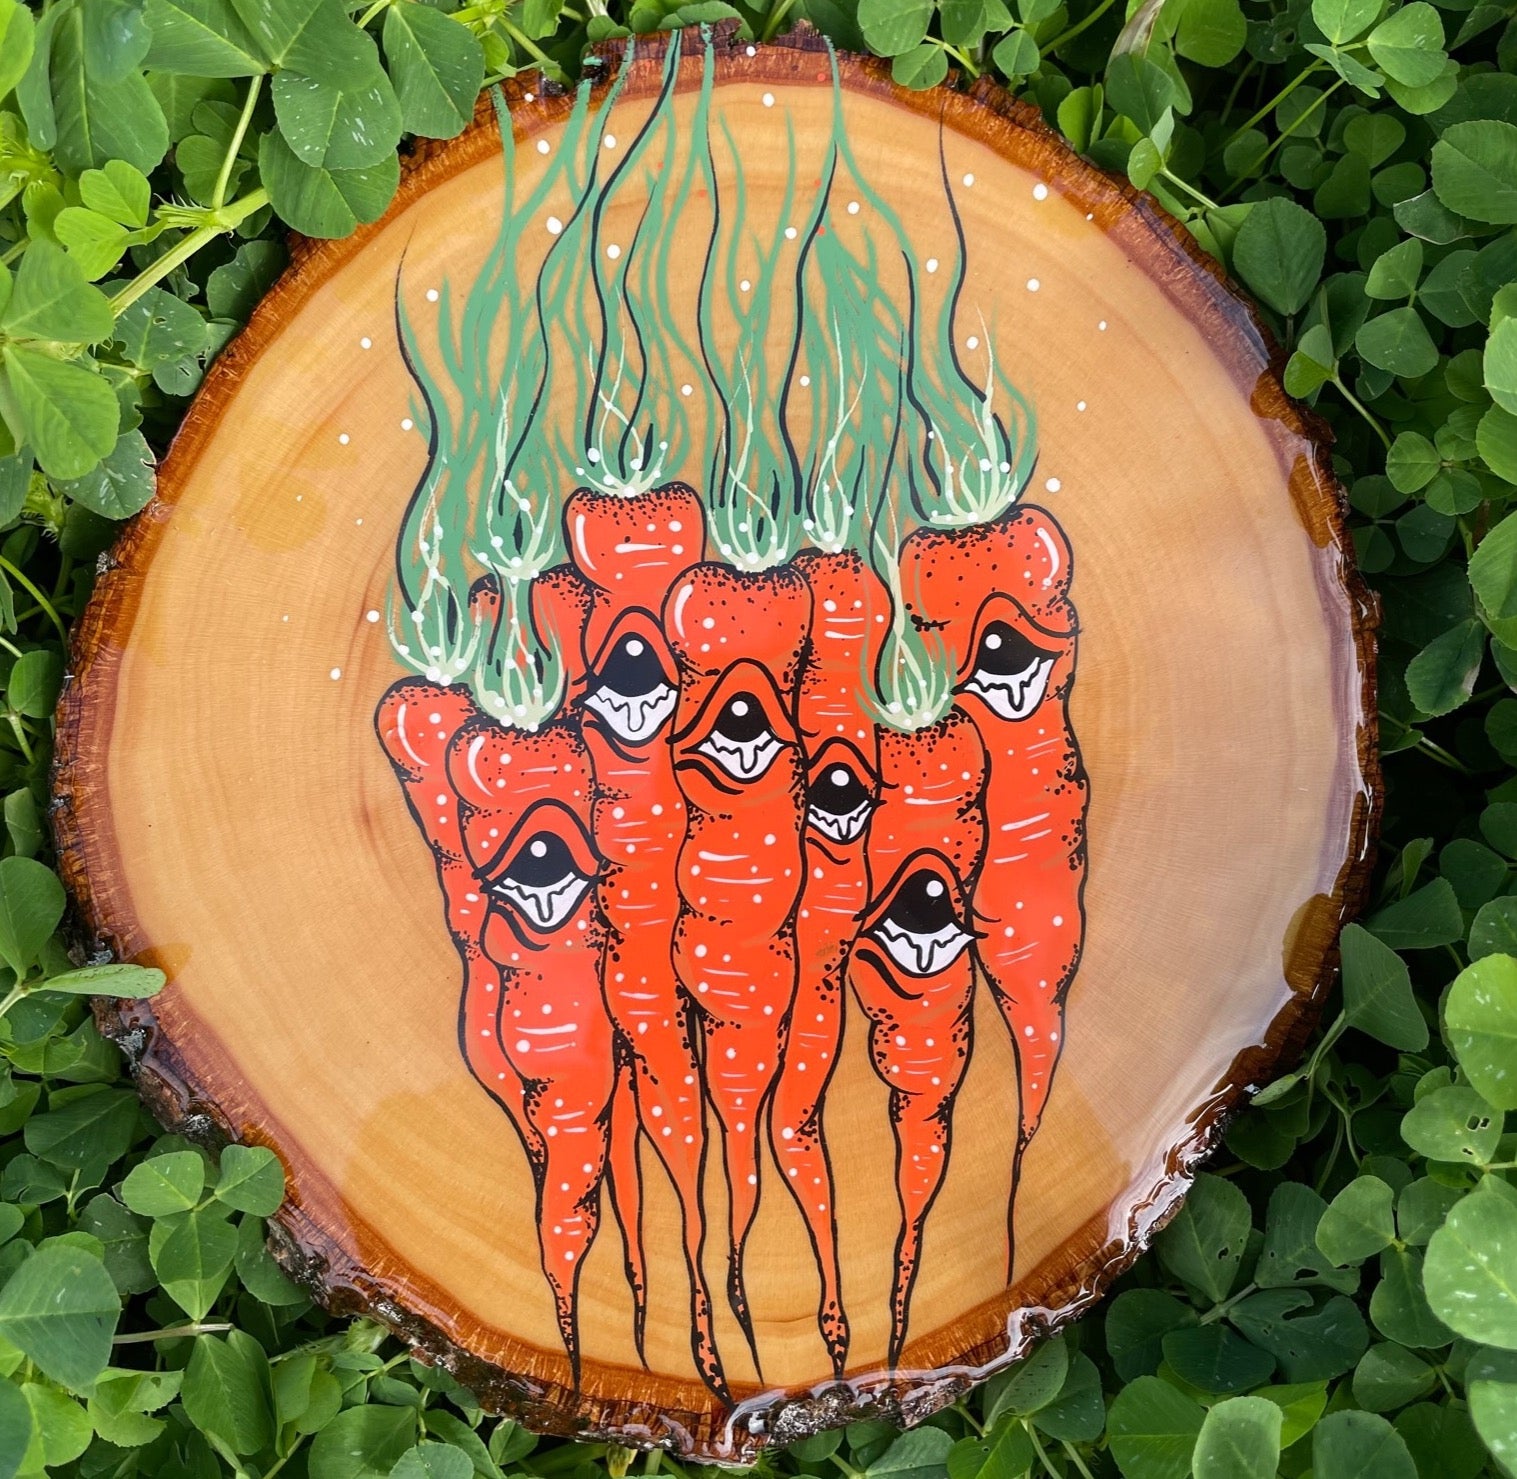 A photo of Louisiana artist, Tristen Rolling's original acrylic painting of a bunch of carrots on a round slice of oak wood. The painting is coated in a layer of epoxy resin and reflects Tristen's love for Louisiana farmers markets.  